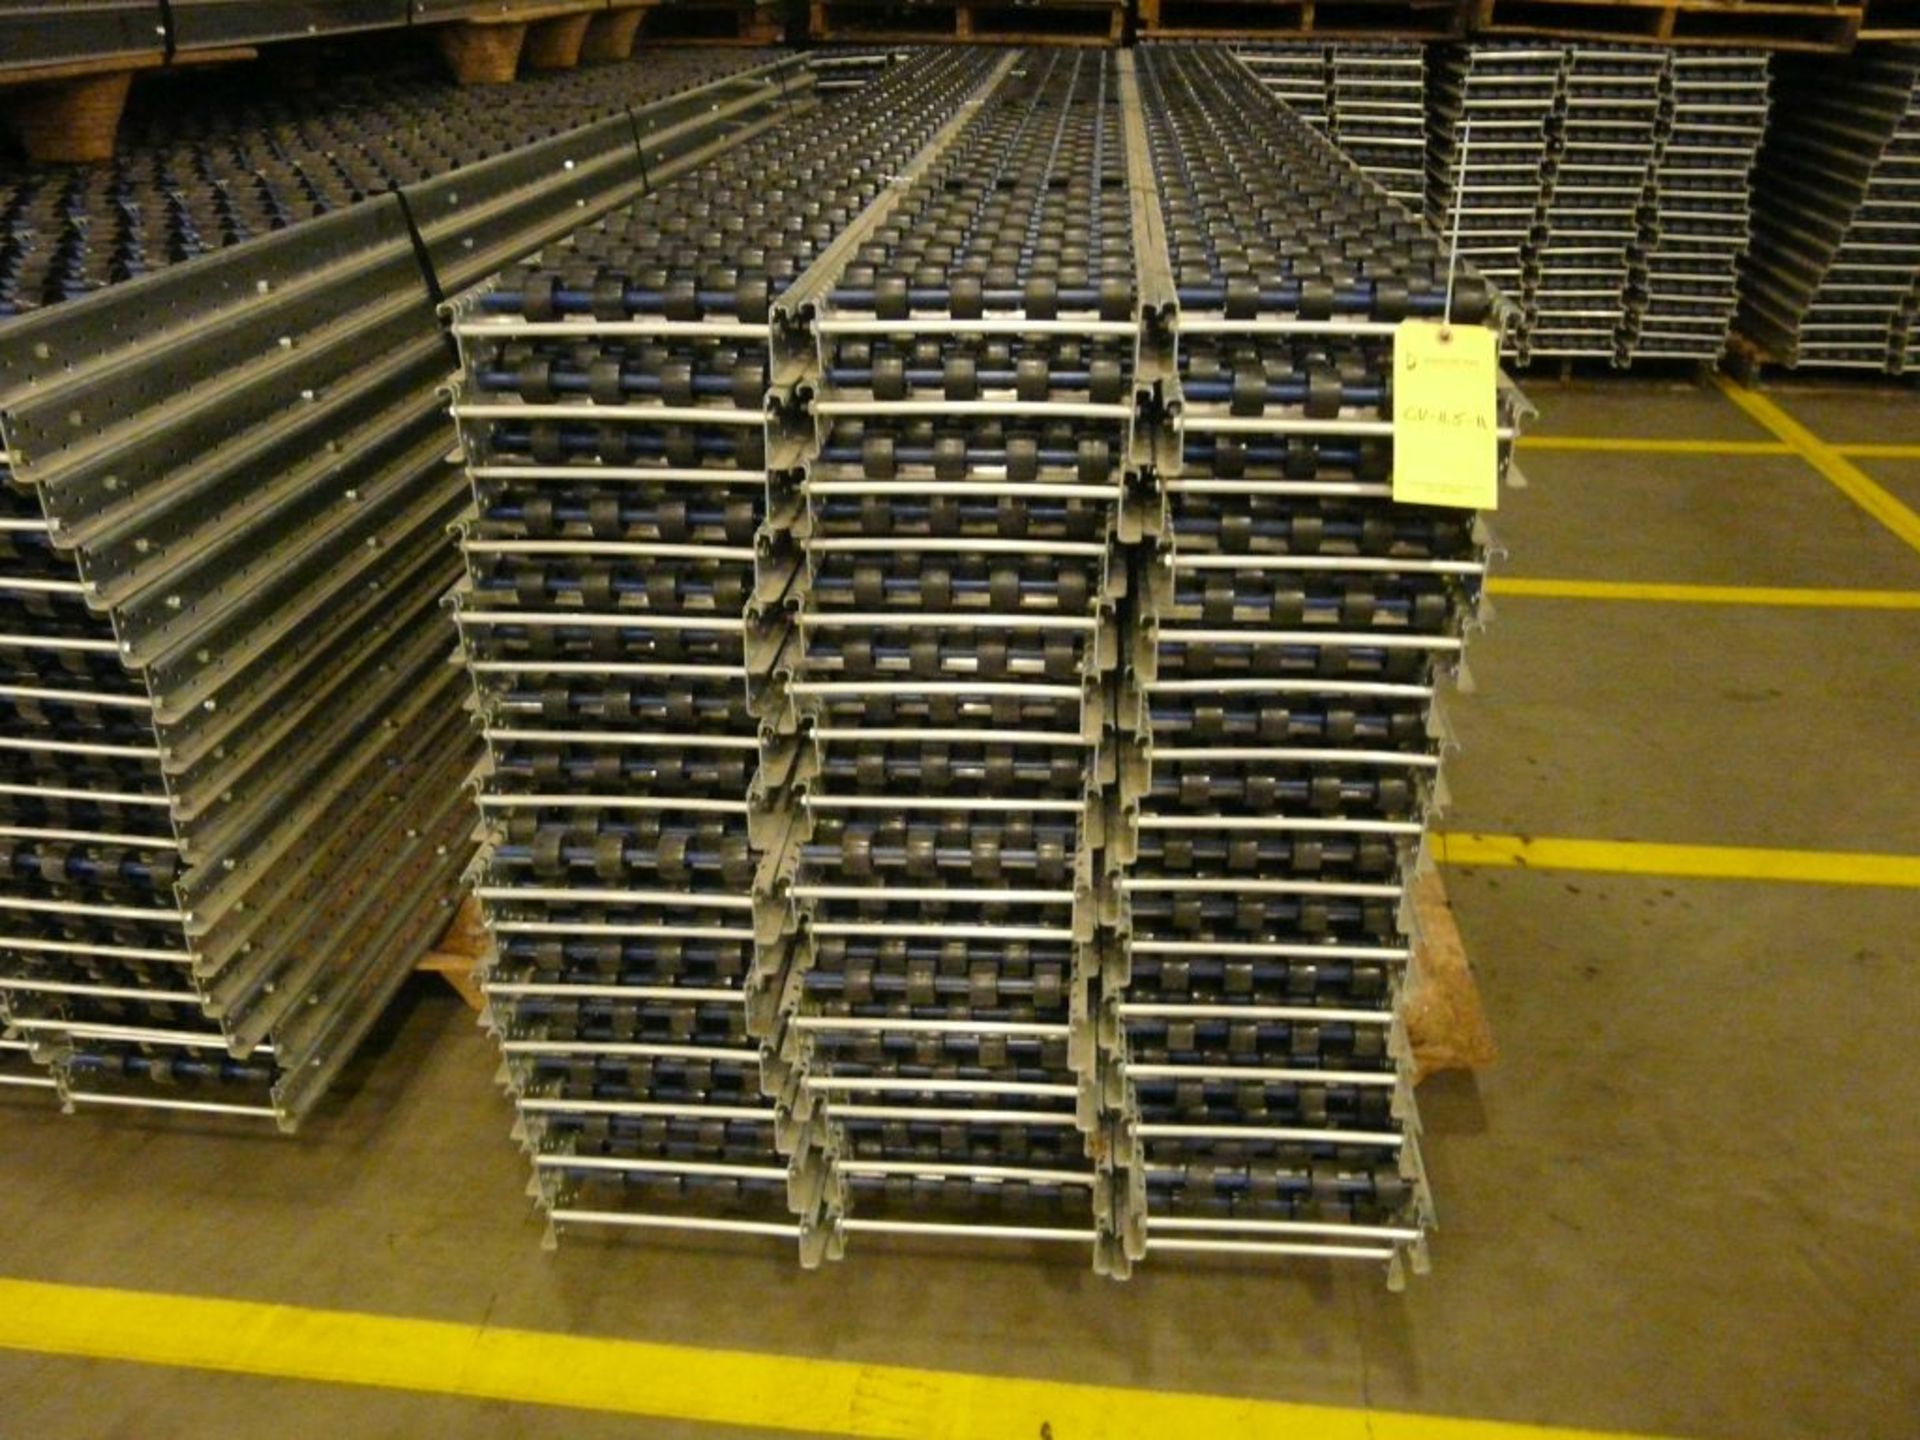 Lot of (90) SpanTrack Wheelbed Carton Flow Conveyors - 11.5'L x 11"W; Tag: 224223 - $30 Lot - Image 2 of 4